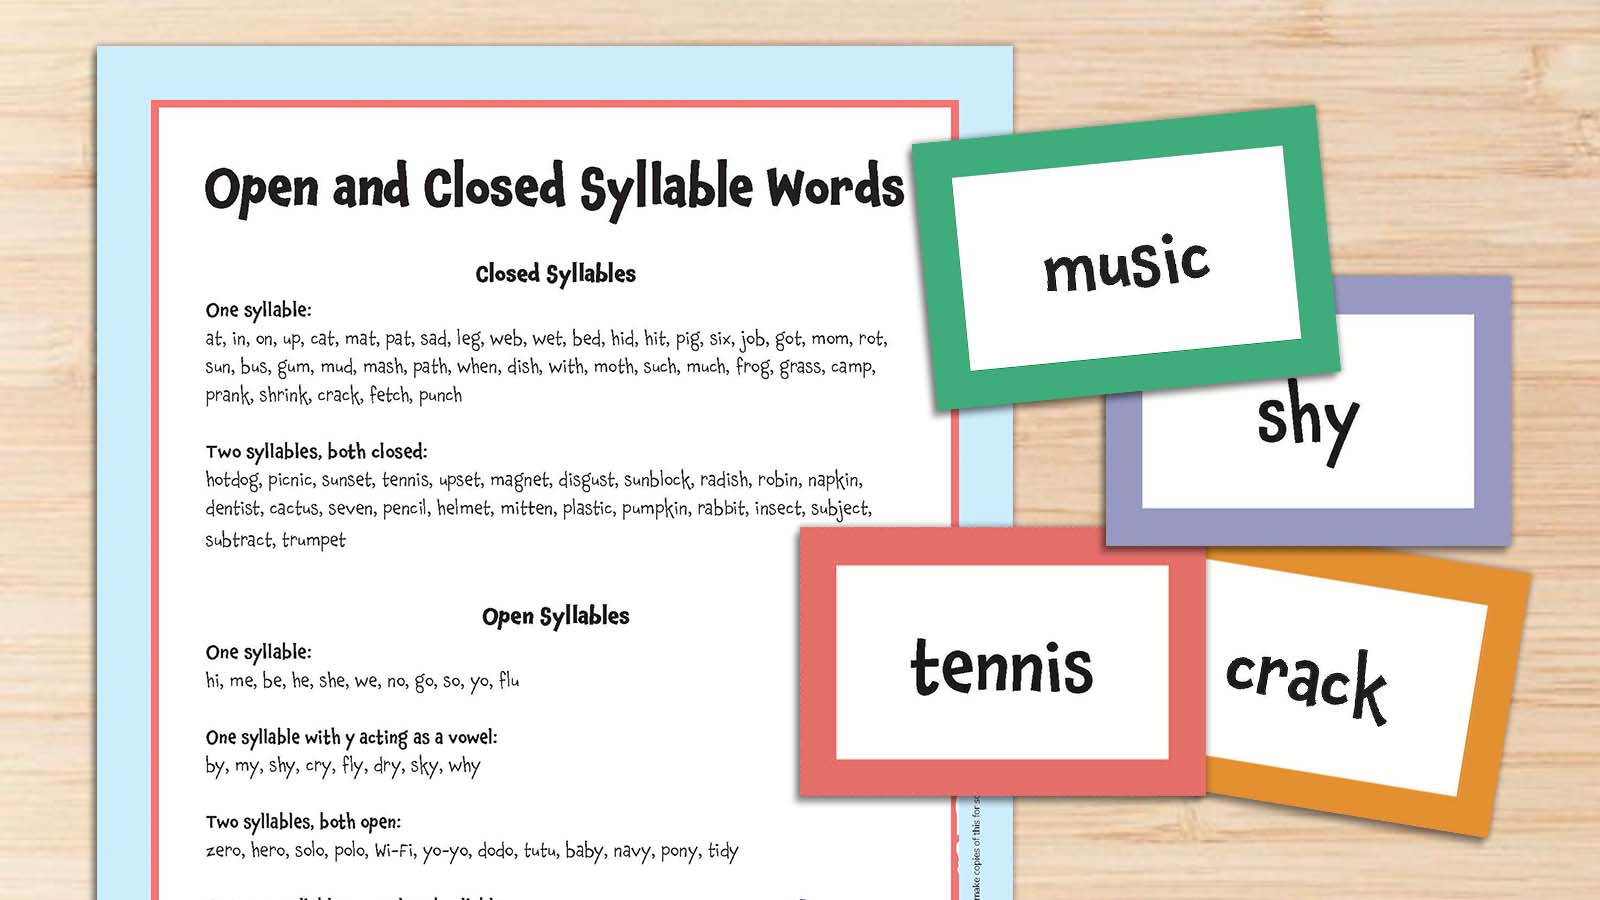 Printable word list and flashcards with open and closed syllable words.